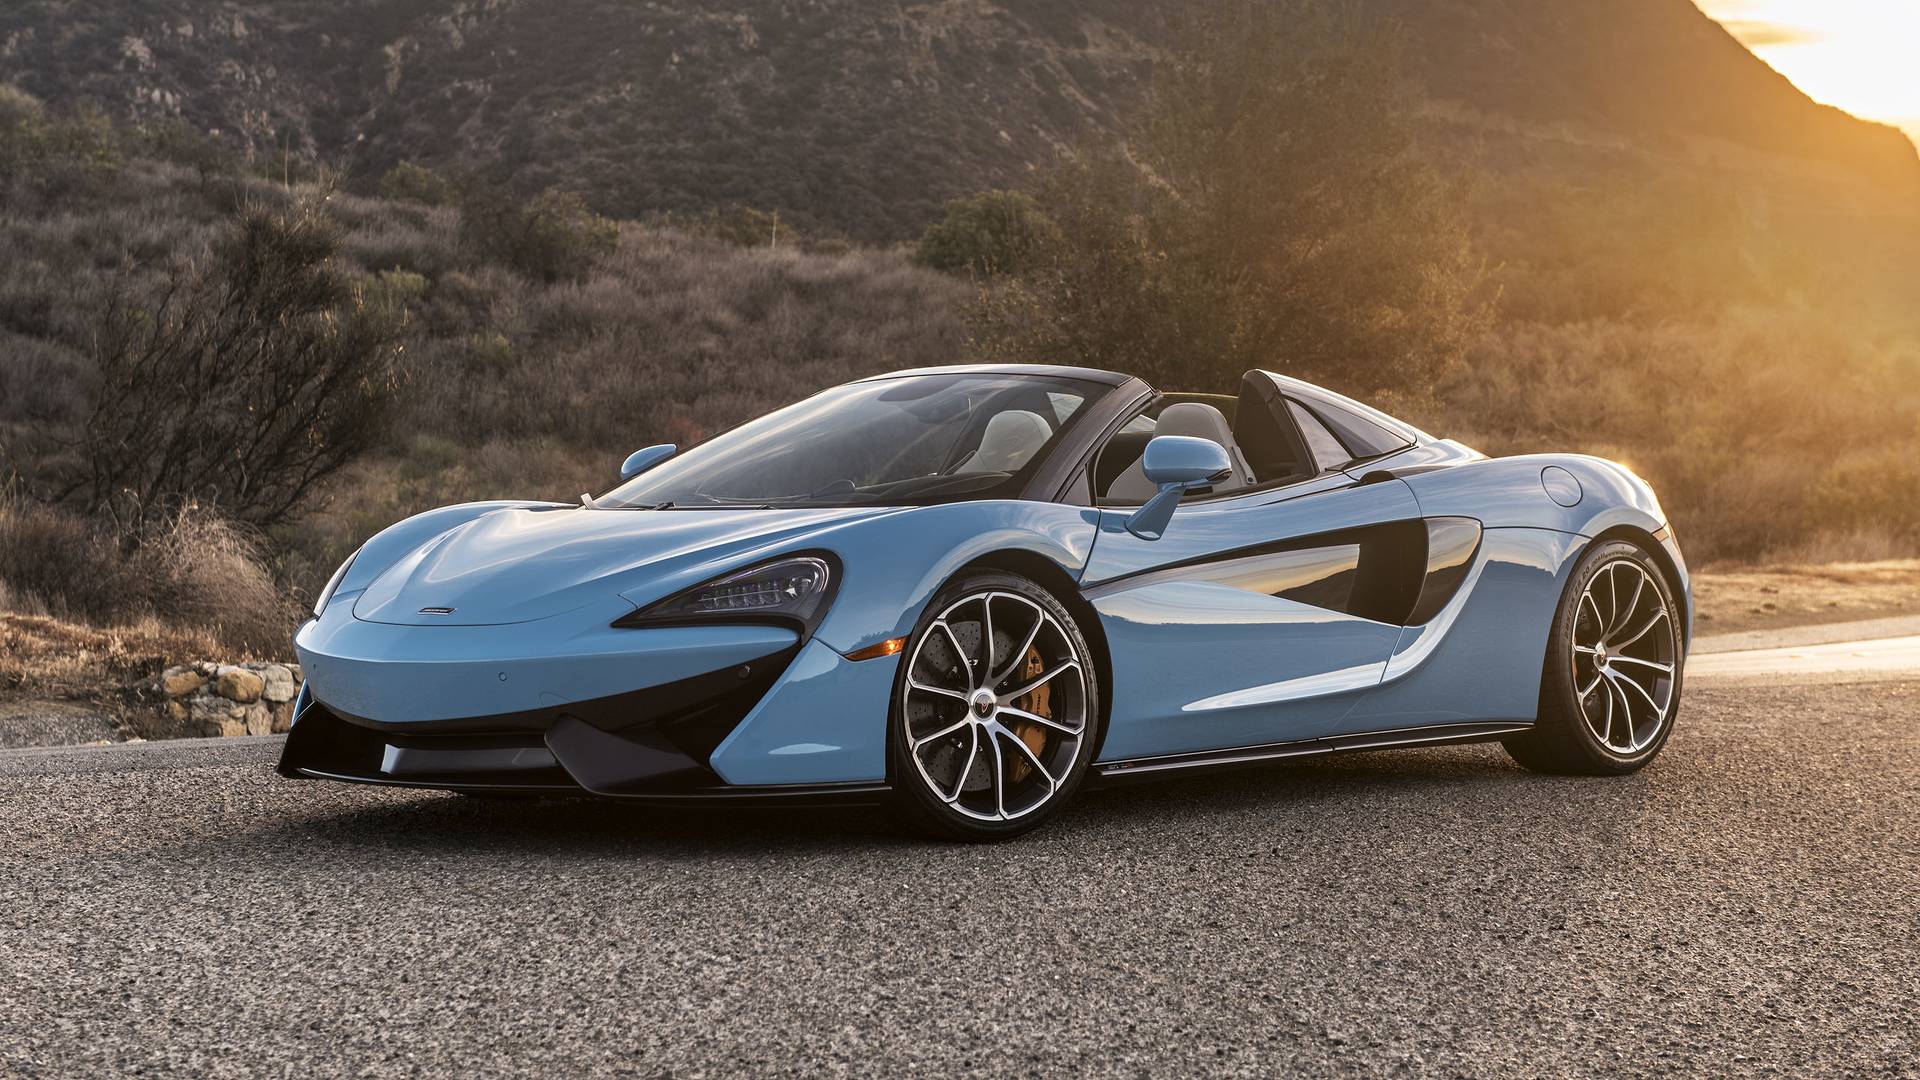 McLaren 570S Spider Review: Go On, Take Your Top Off